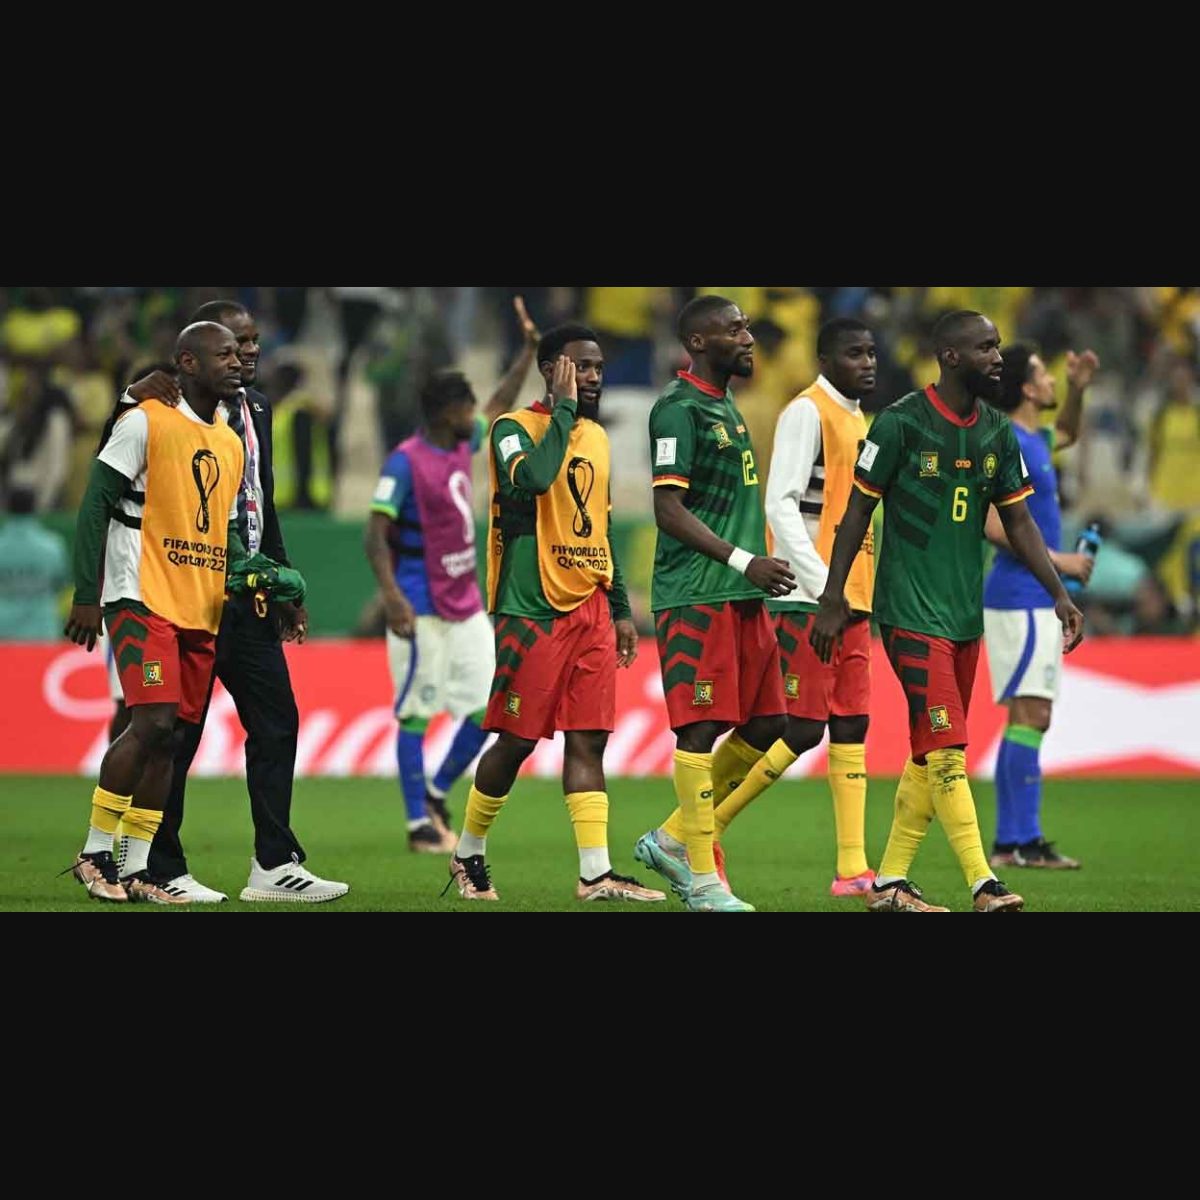 FIFA World Cup: Brazil shocked by Cameroon but still qualify along